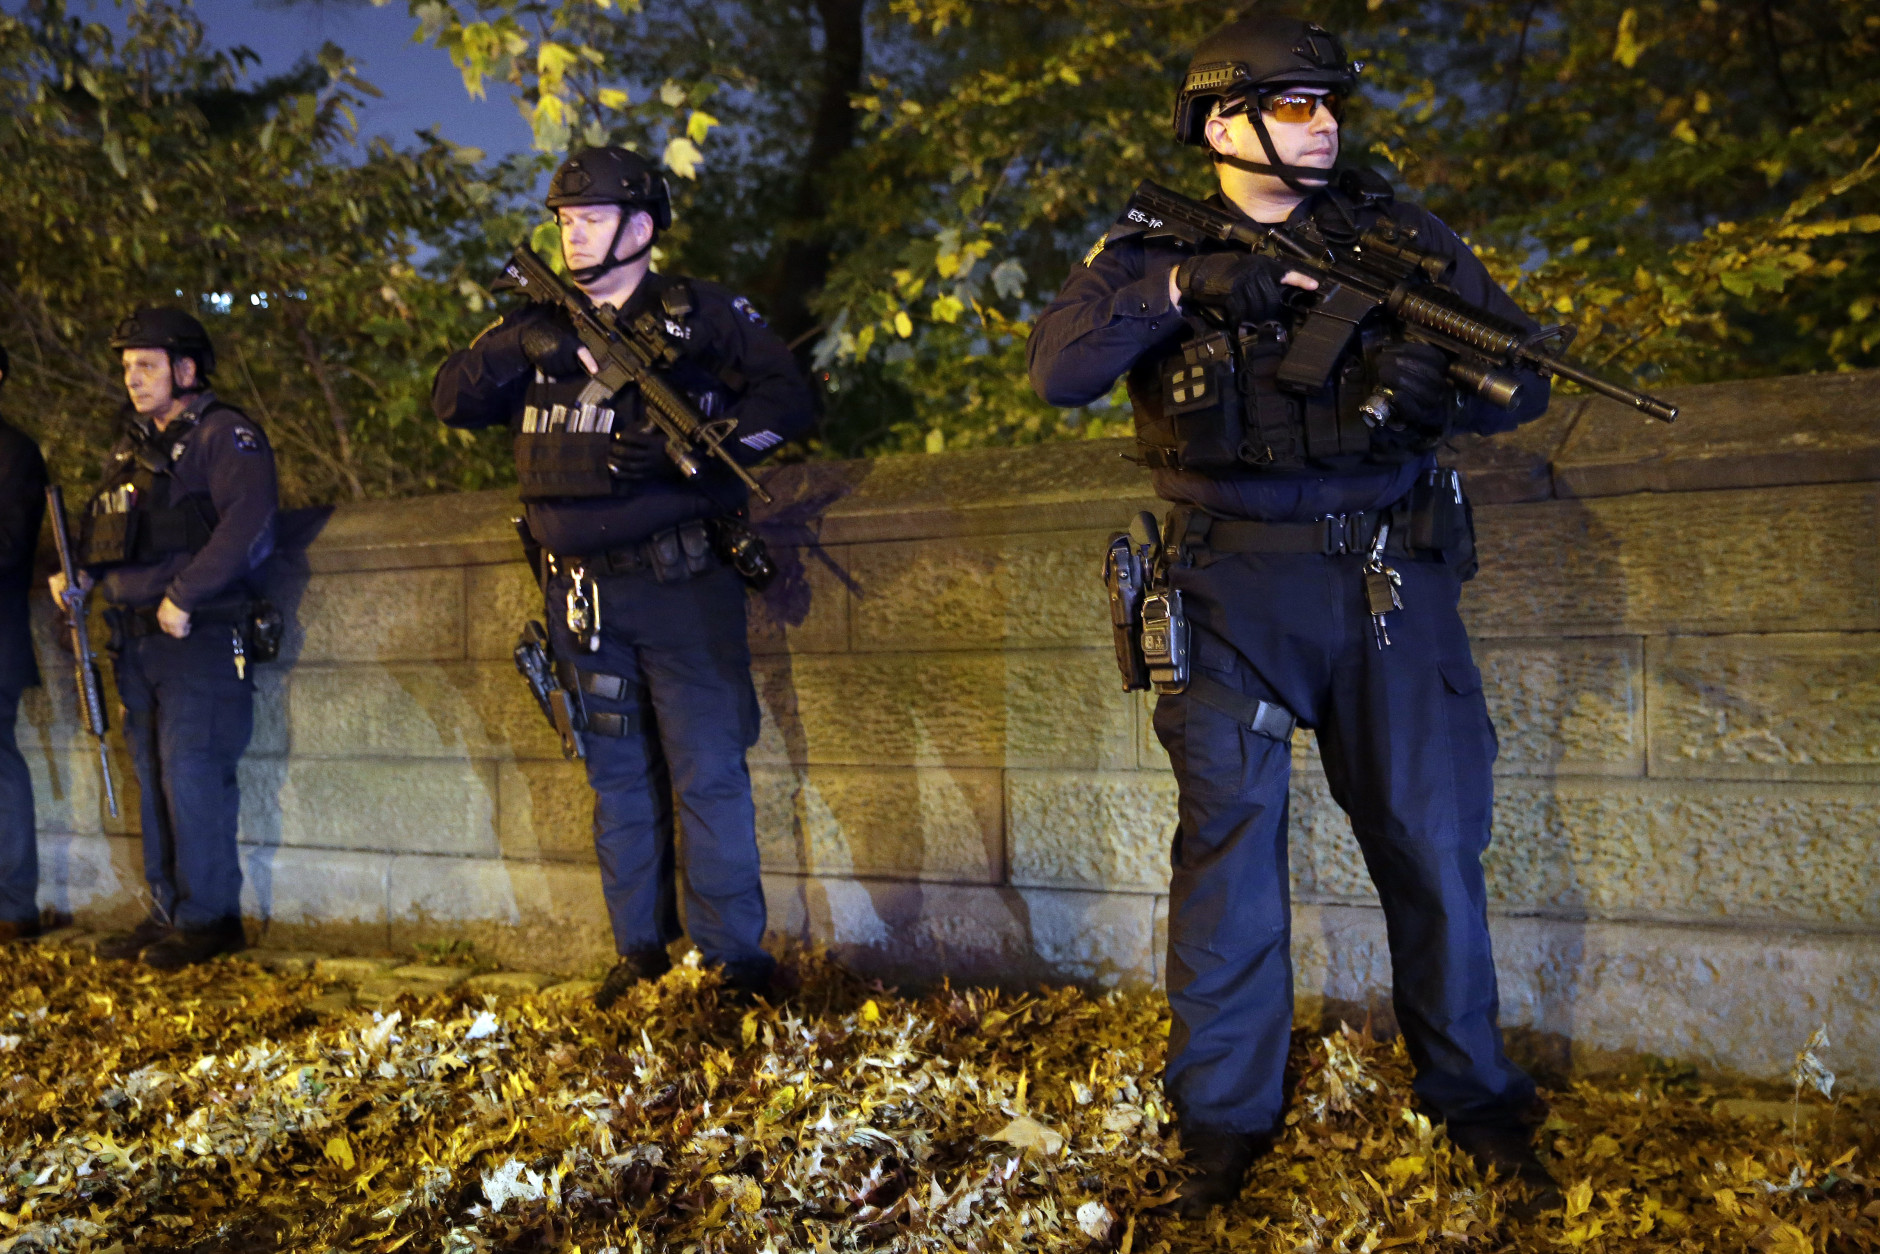 Heavily armed New York City police officers stand guard across the street from the French consulate on New York's Fifth Ave., Friday, Nov. 13, 2015. Police in New York say they've deployed extra units to crowded areas of the city "out of an abundance of caution" in the wake of the attacks in Paris, France. A New York Police Department statement released Friday stressed police have "no indication that the attack has any nexus to New York City."(AP Photo/Mary Altaffer)